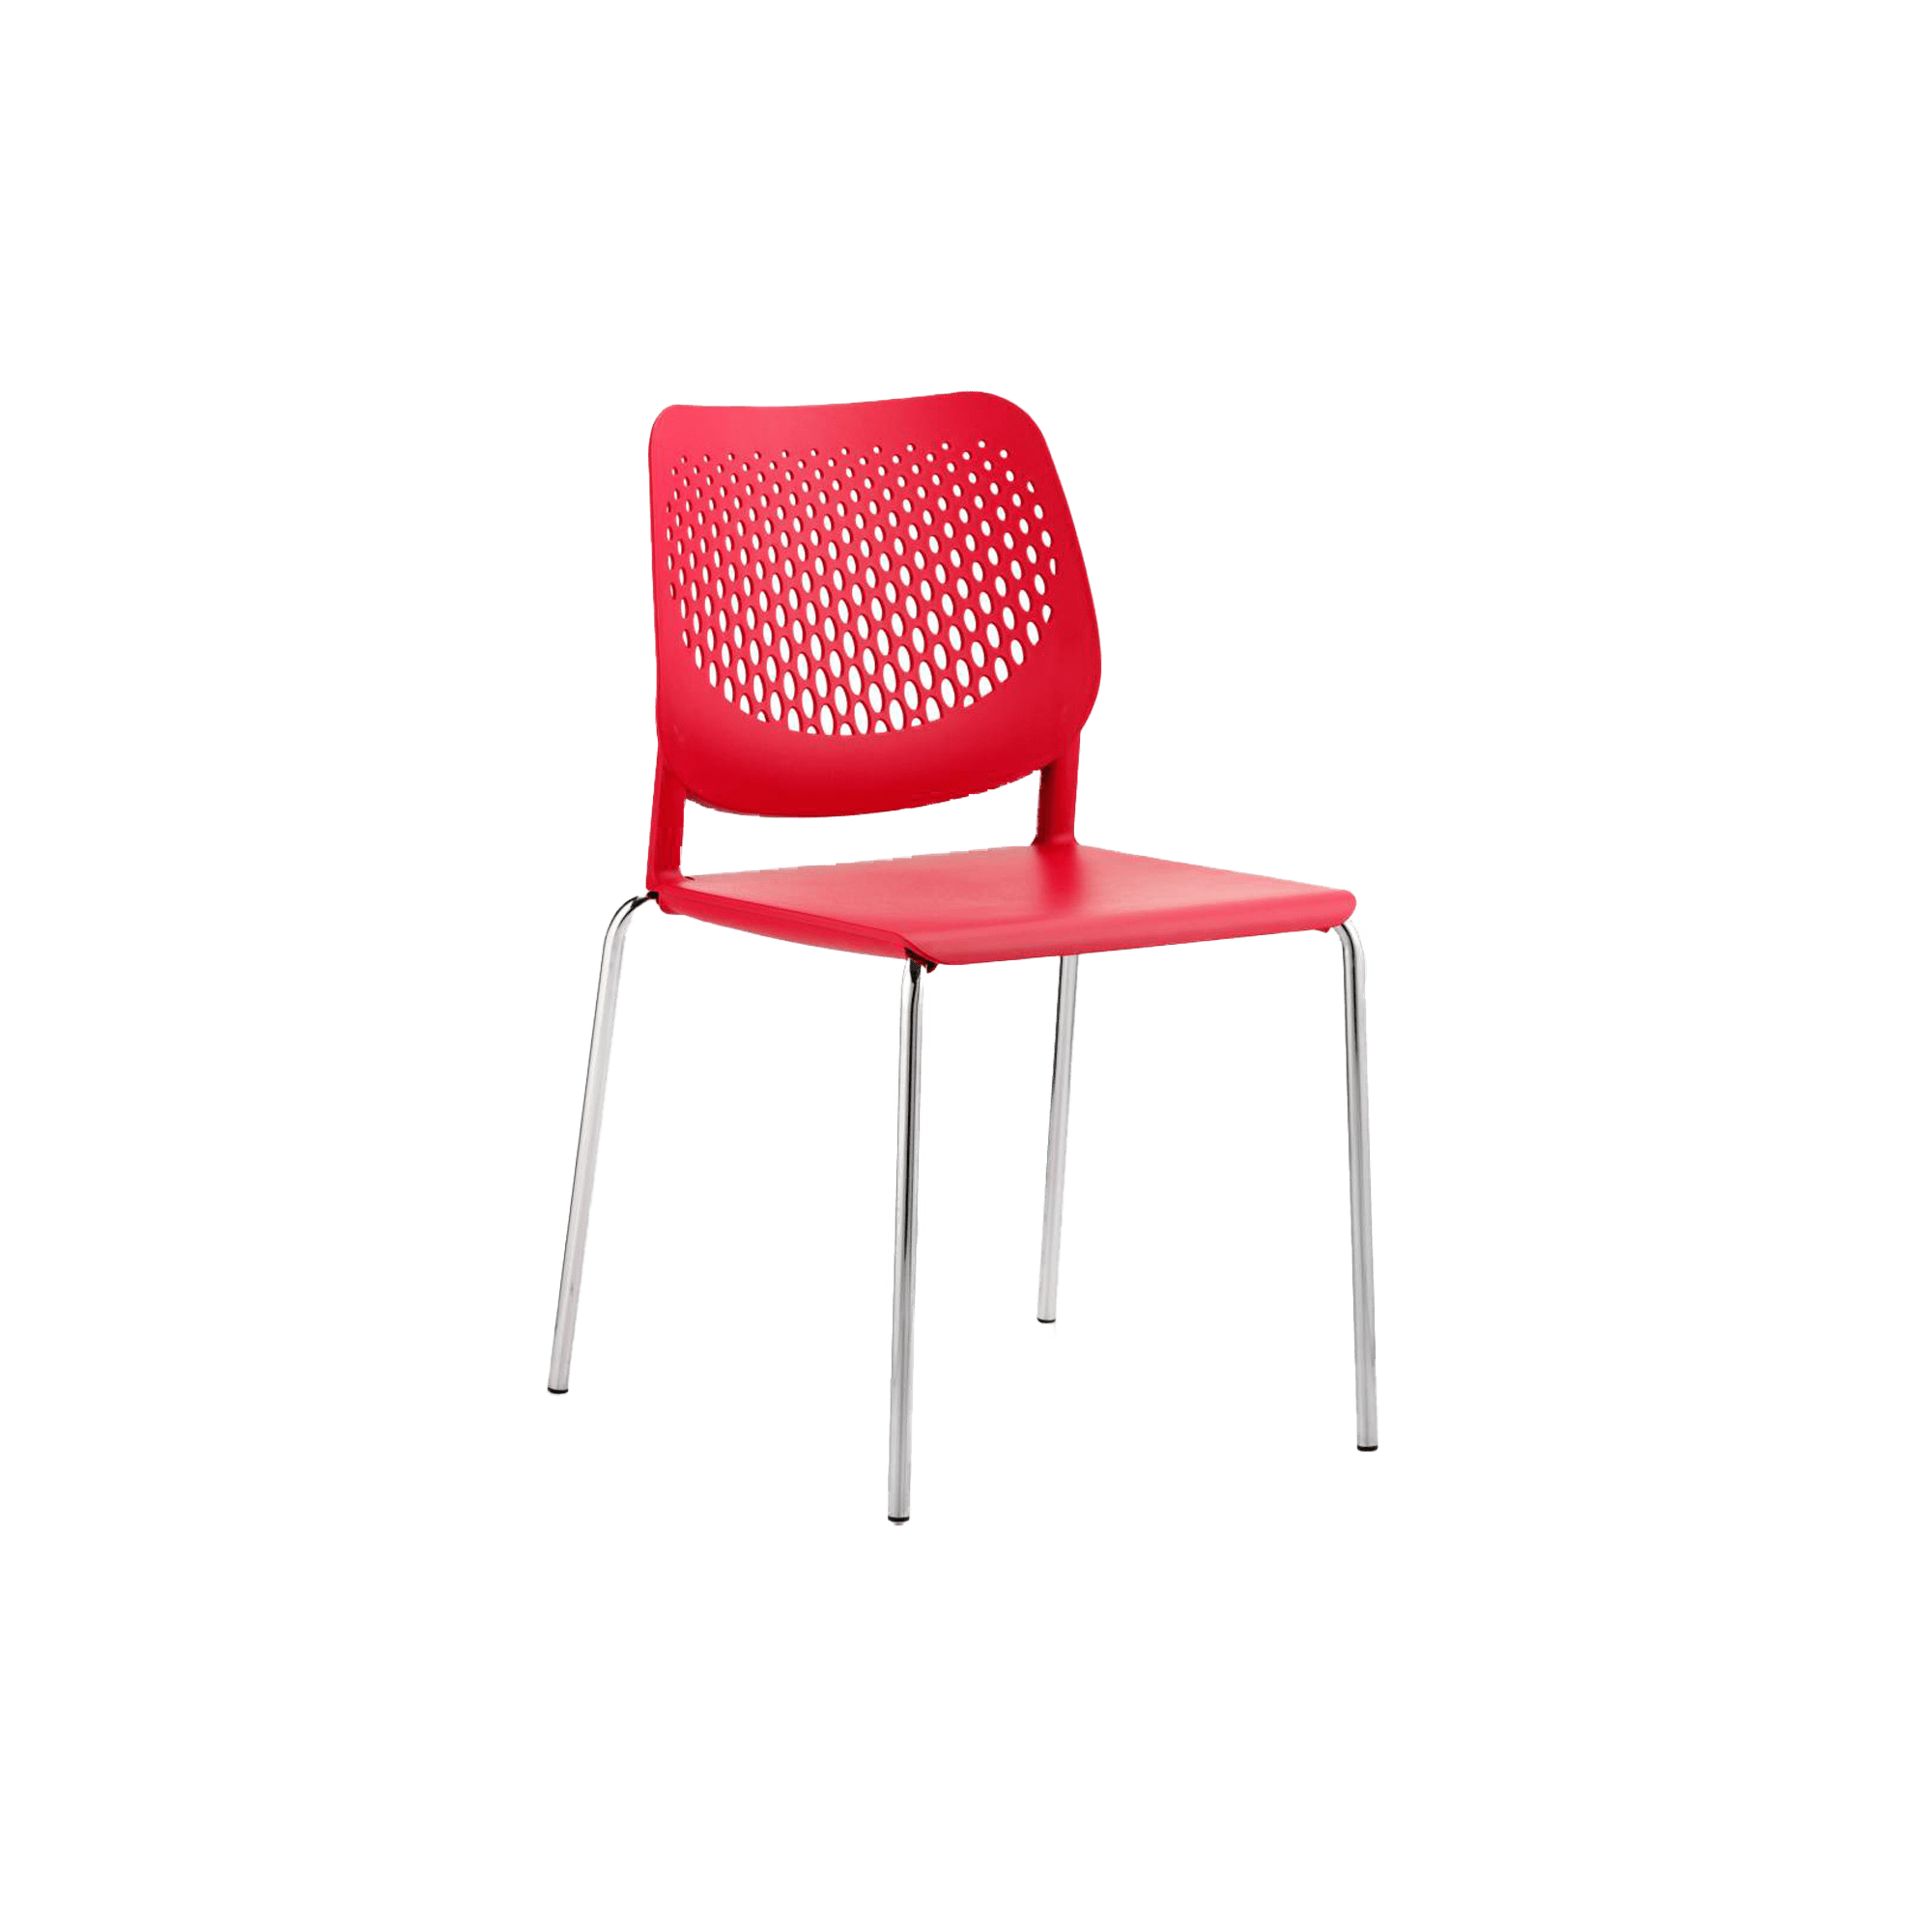 A red plastic chair